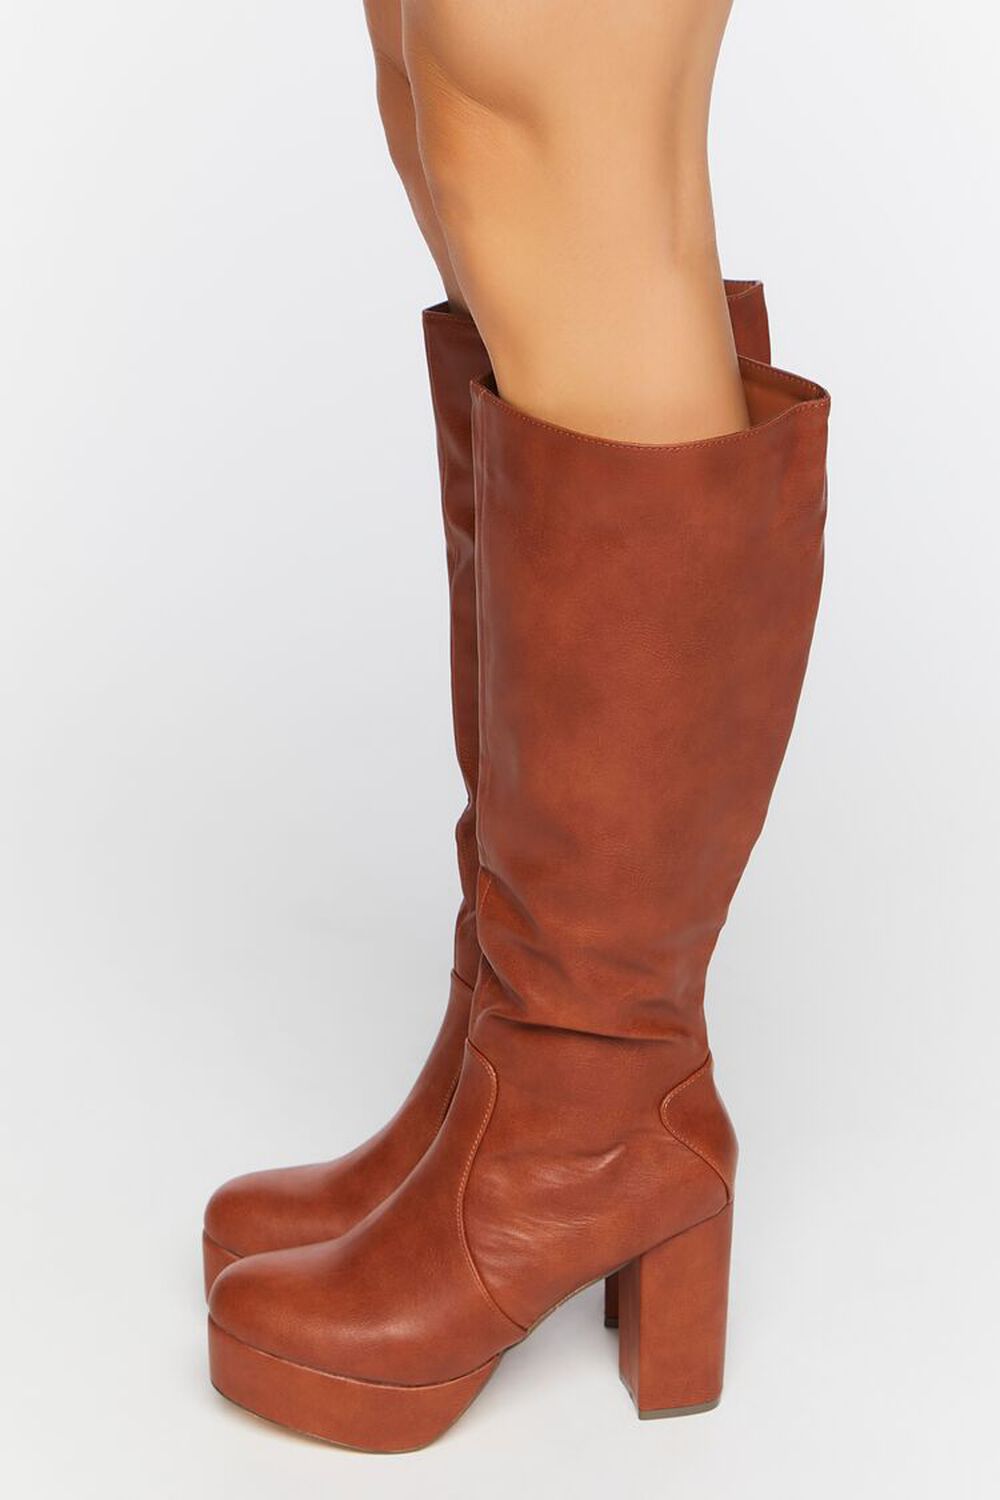 BROWN Faux Leather Knee-High Platform Boots, image 2